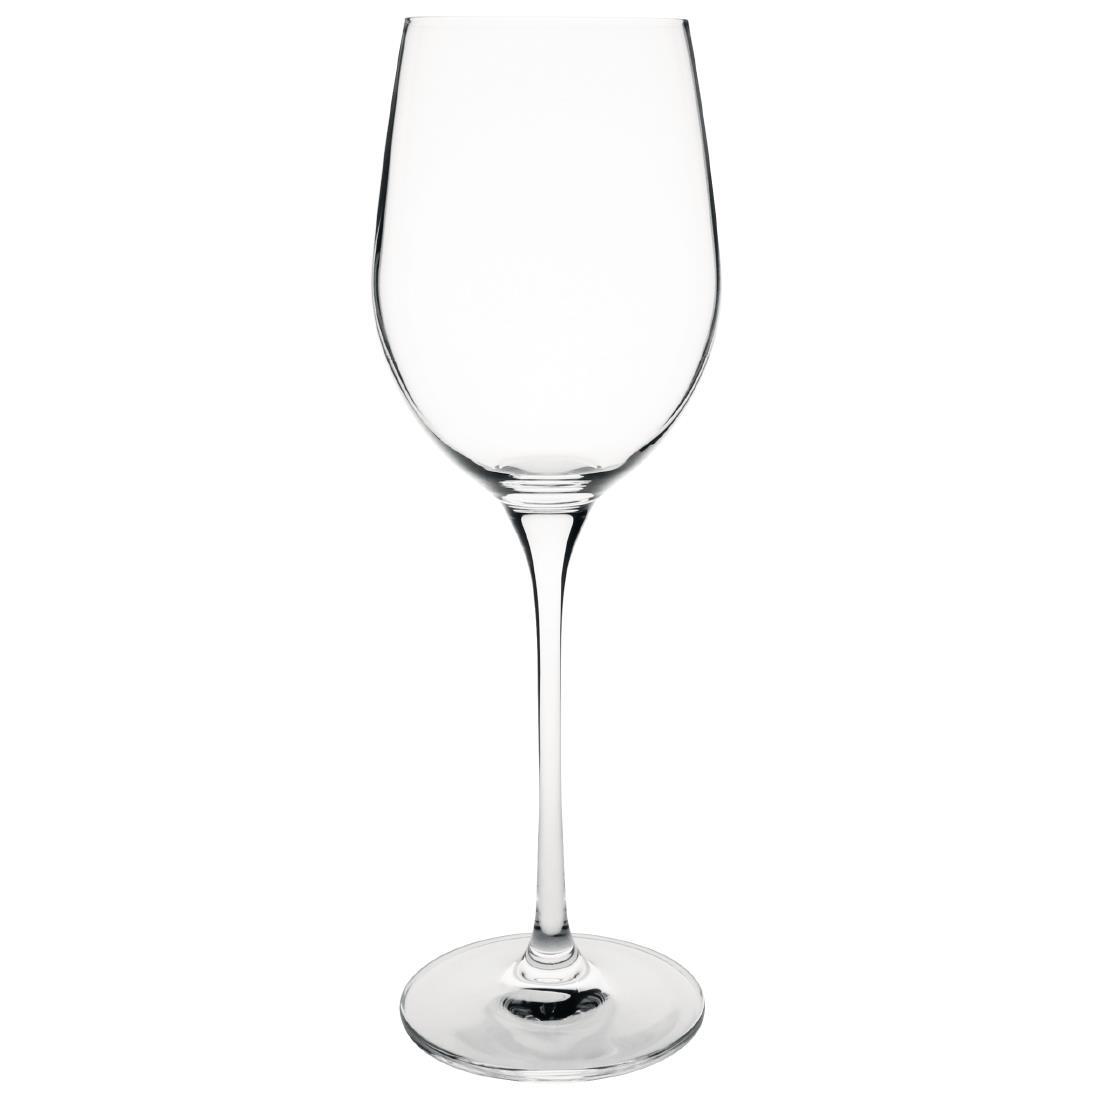 Olympia Campana One Piece Crystal Wine Glasses 500ml (Pack of 6) - CS495  - 1